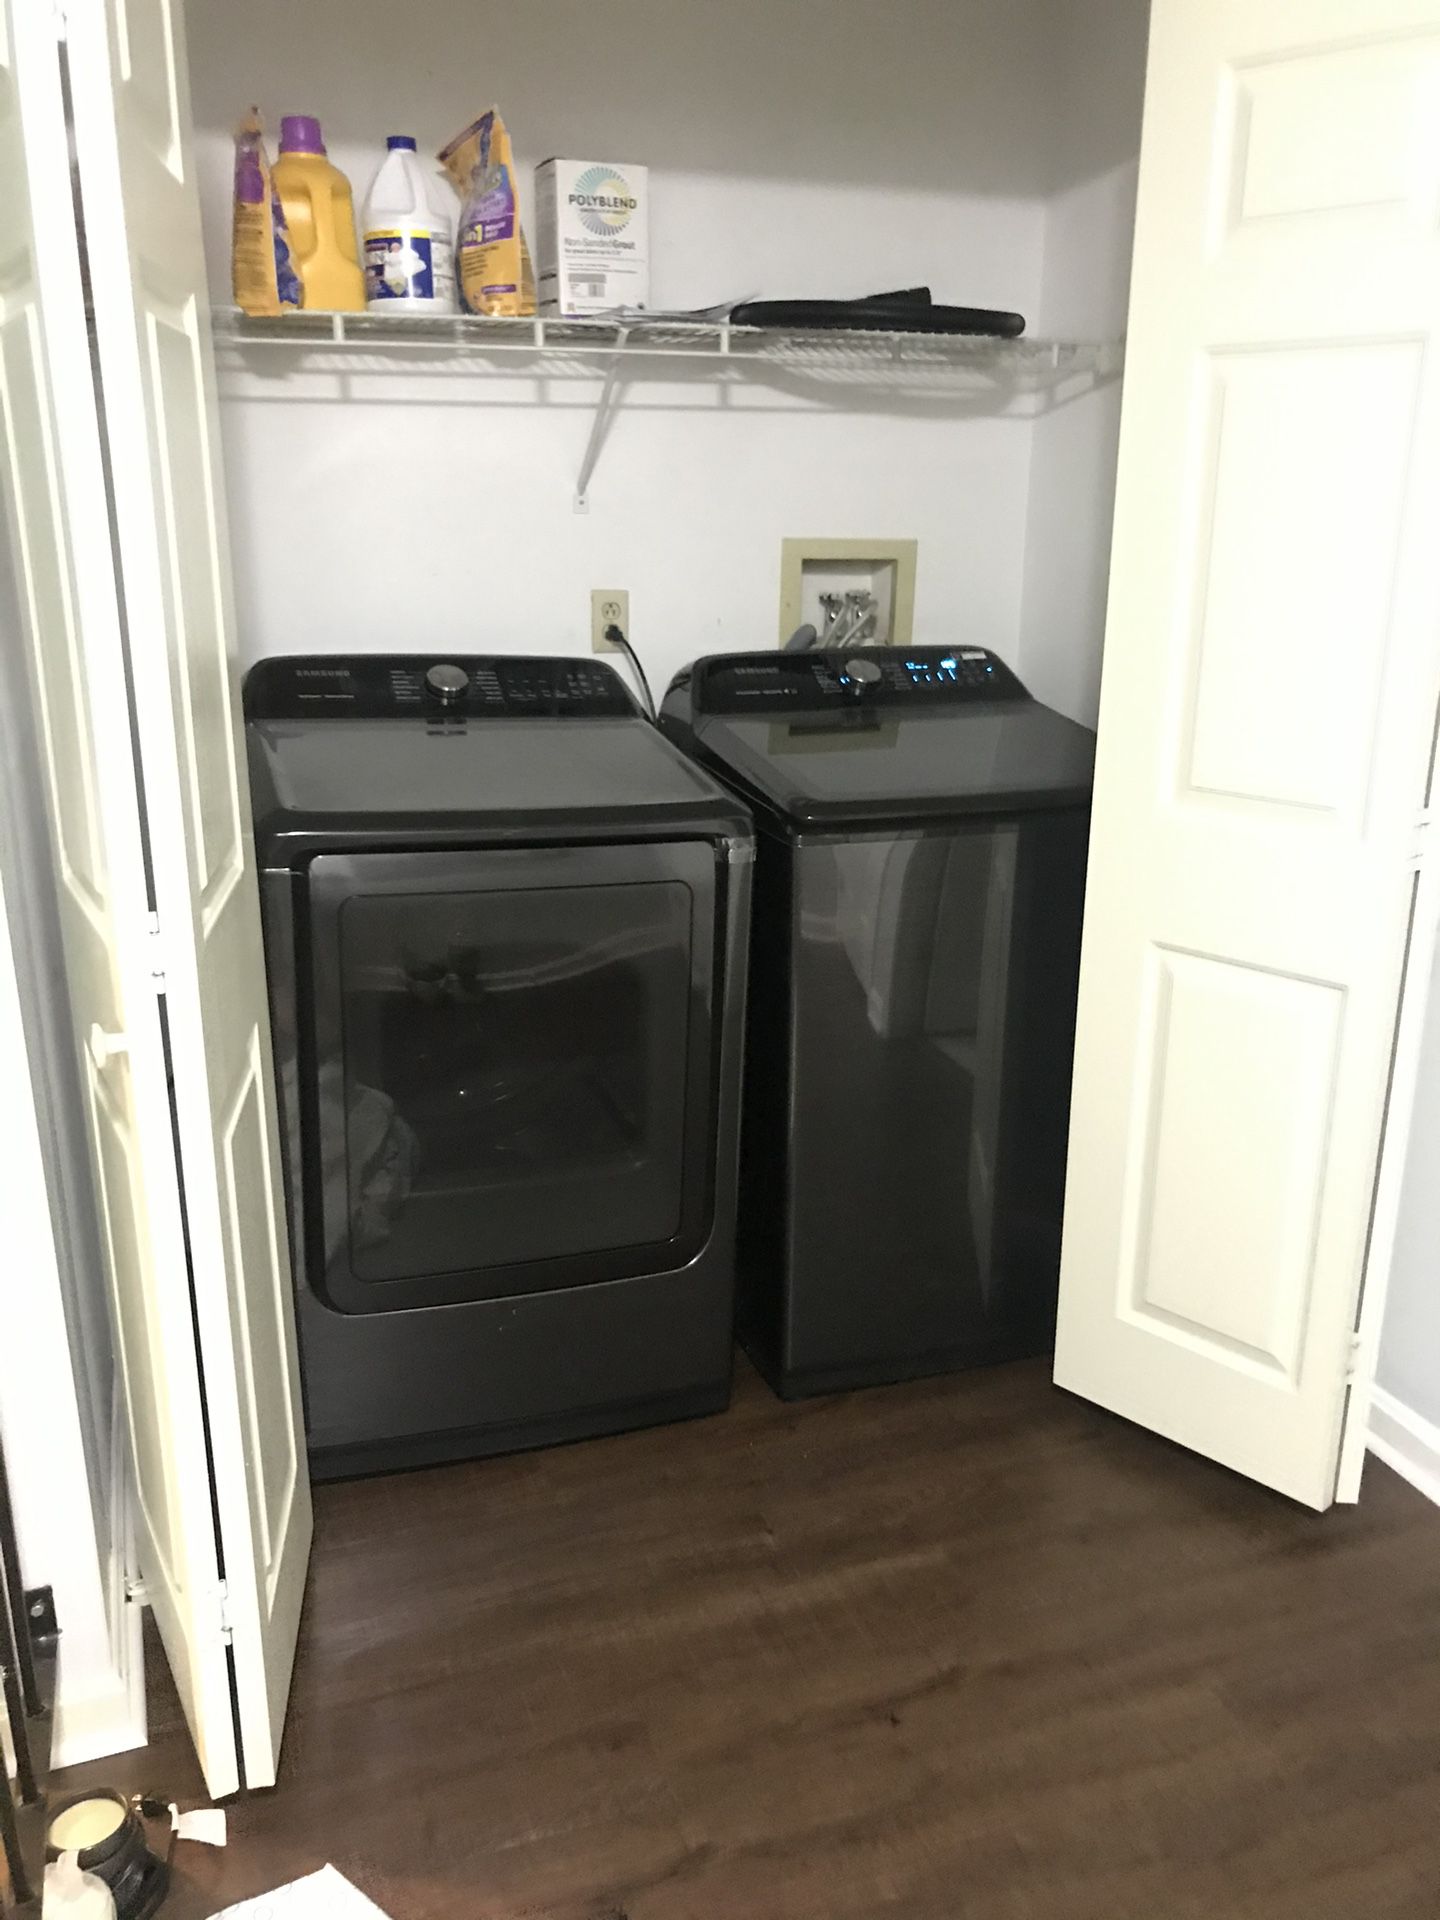 Washer Dryer For Sale